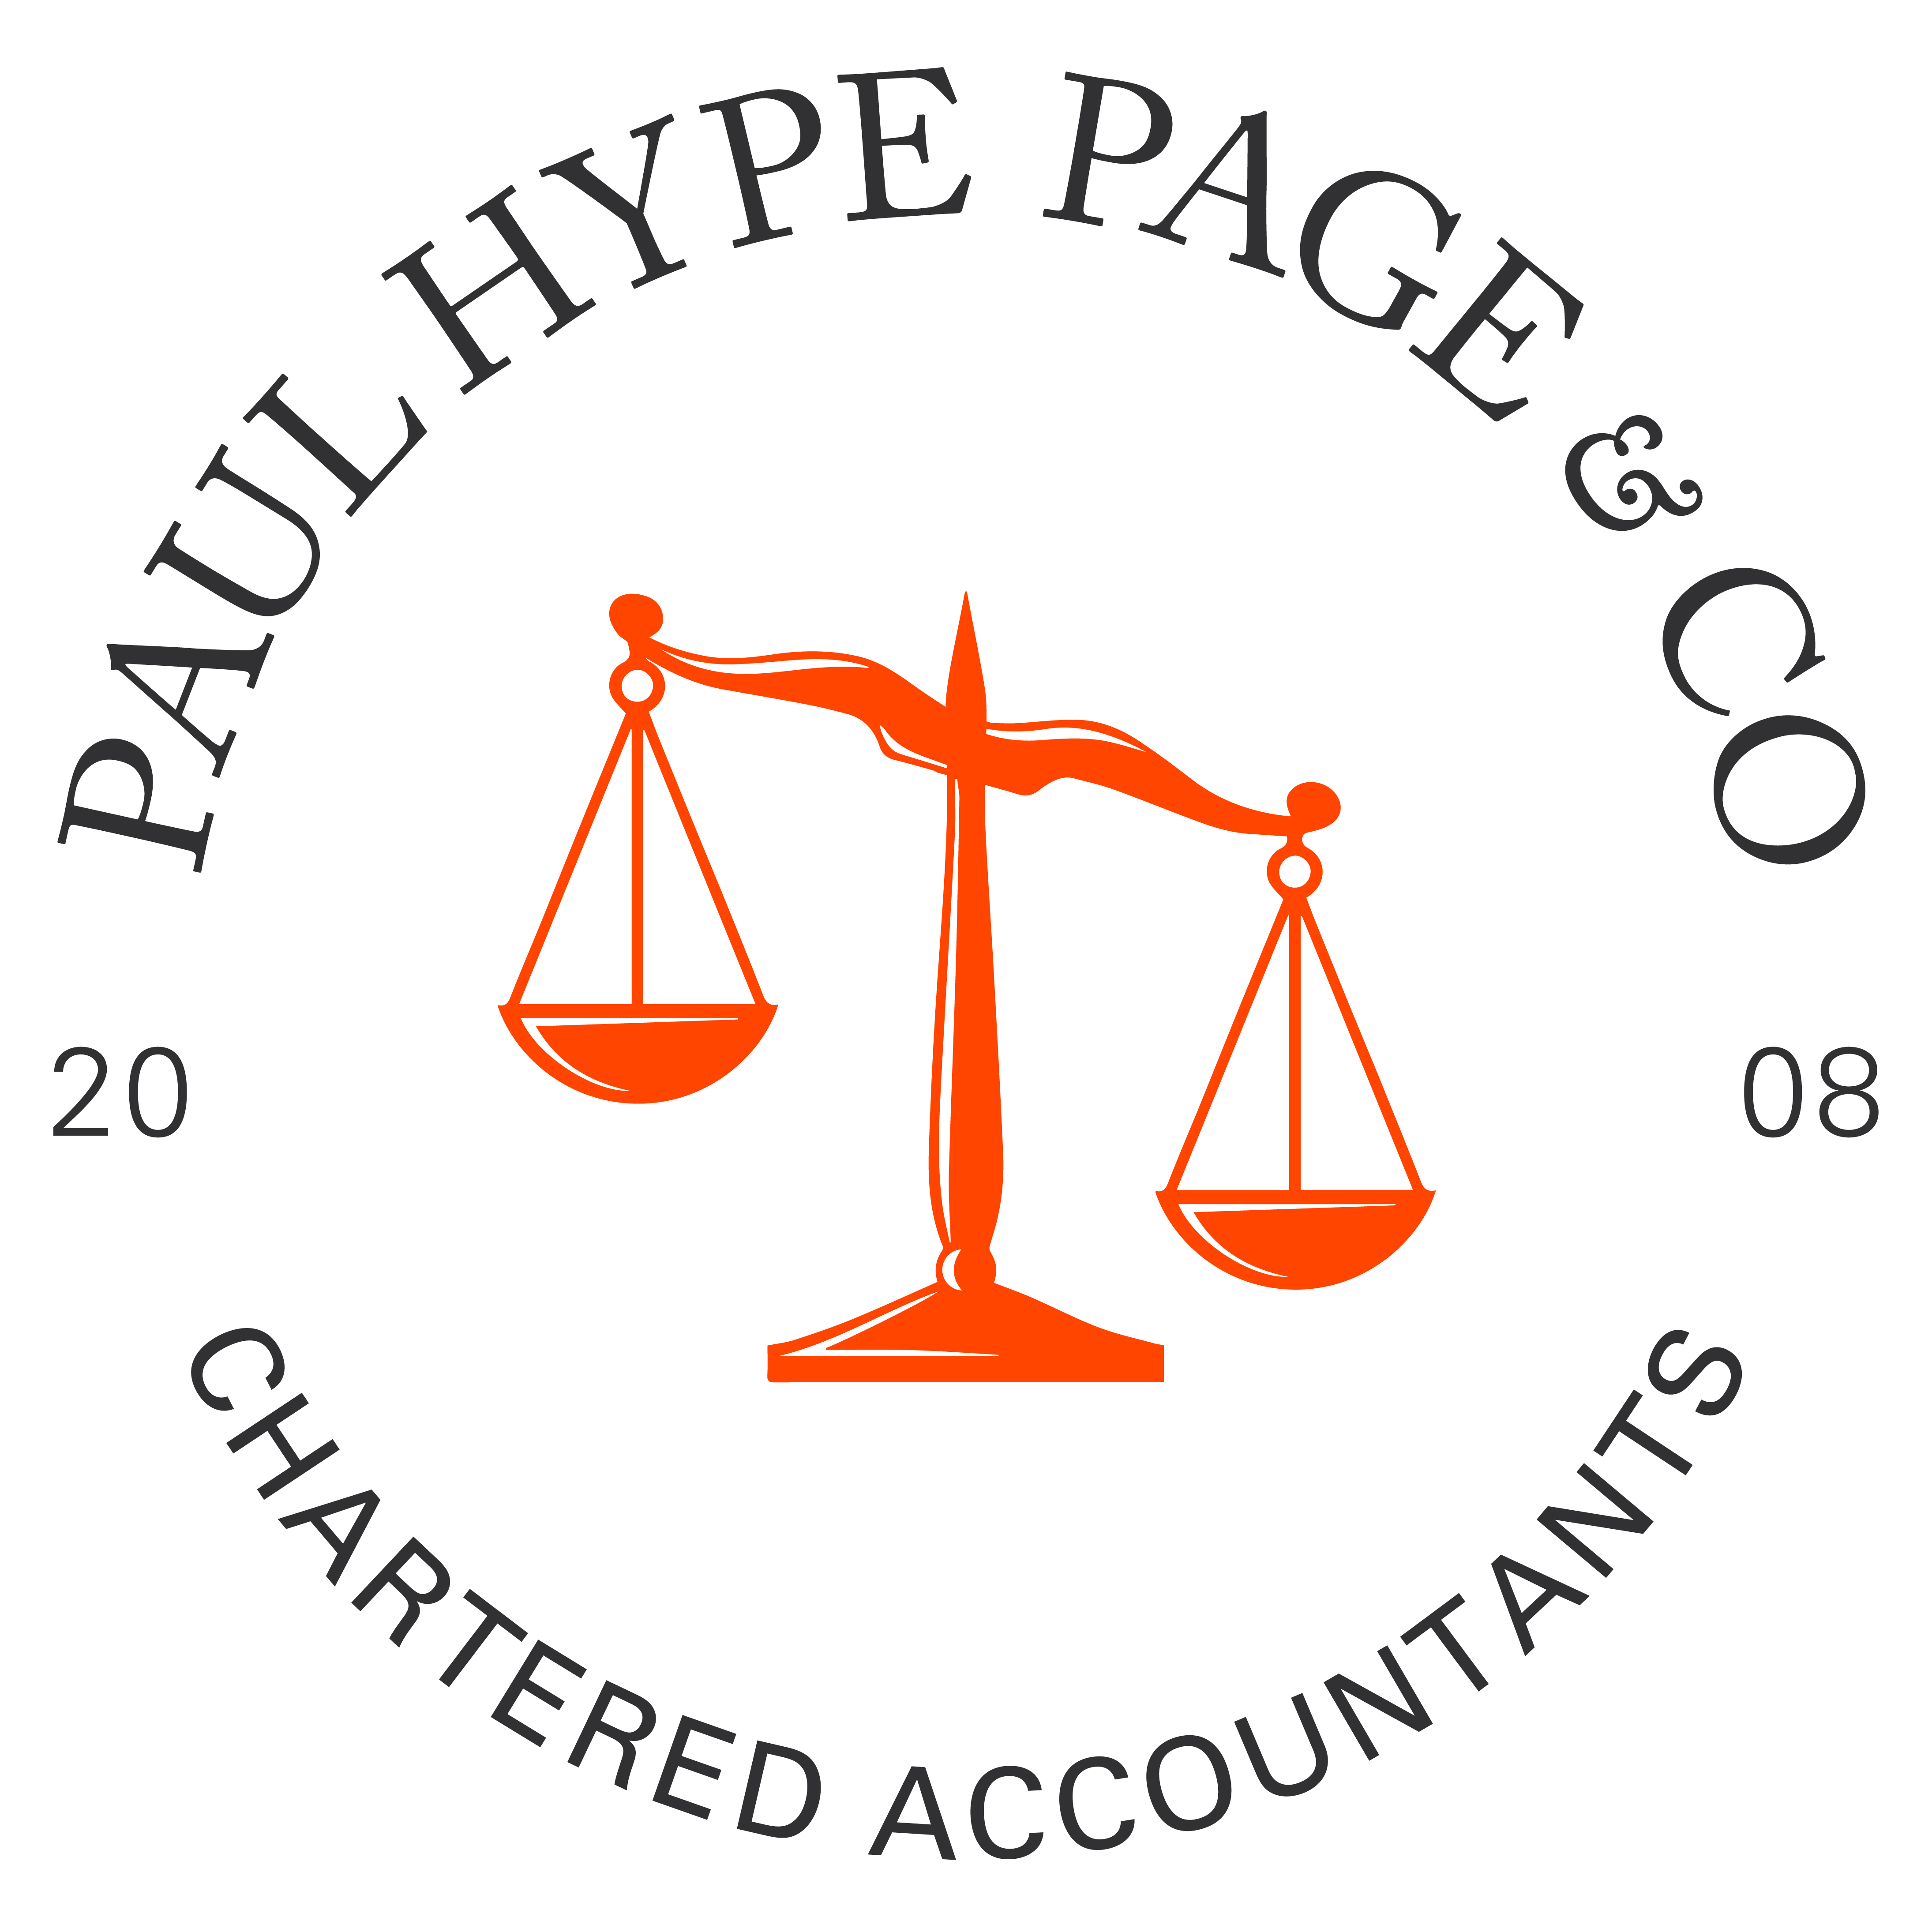 Paul Hype Page Indonesia Logo